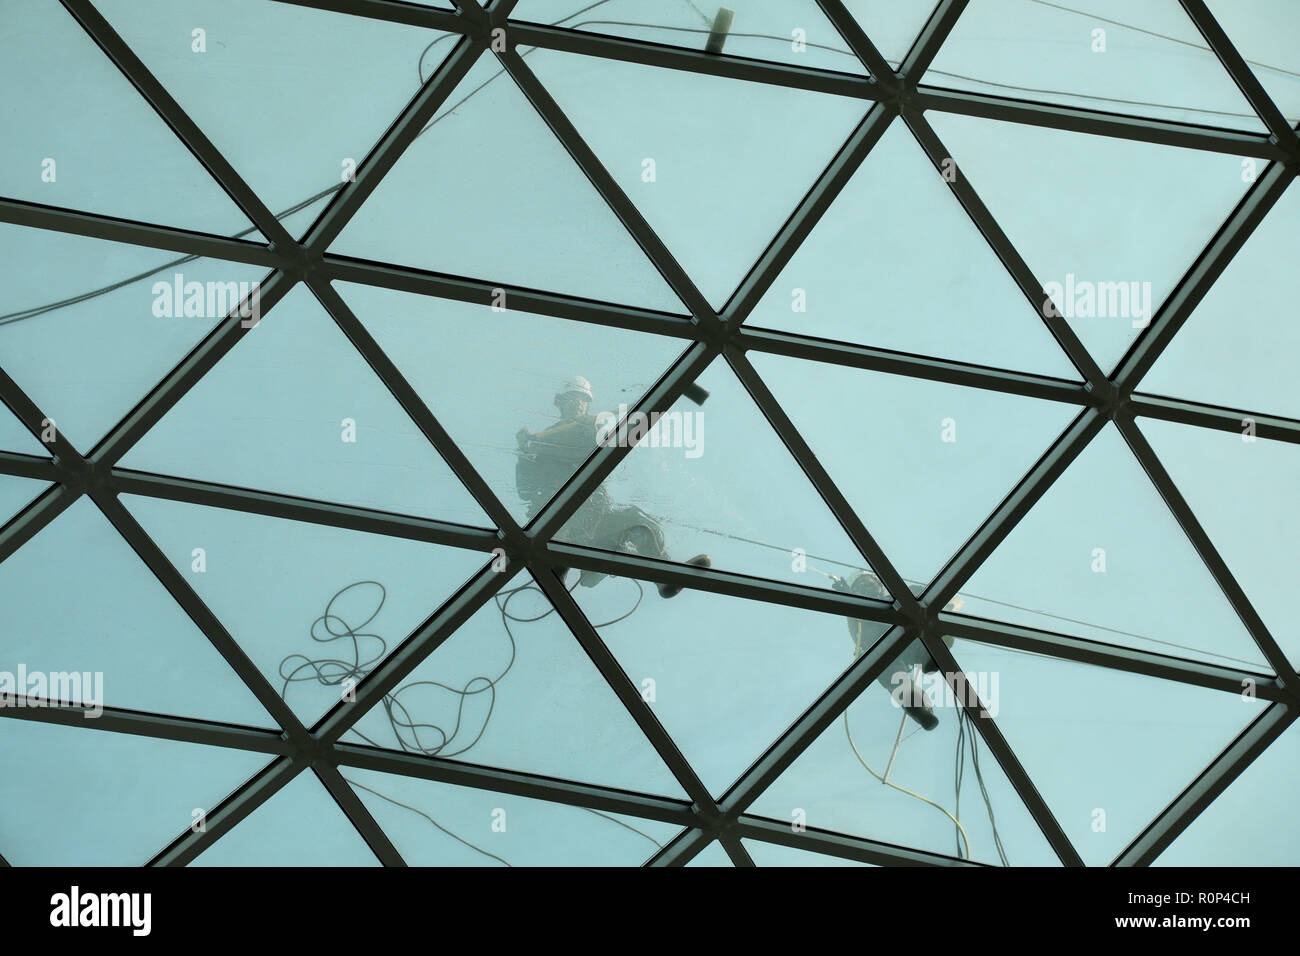 London, UK – October 5 2018: Workers clean the glass and steel roof above the Great Court of the British Museum Stock Photo